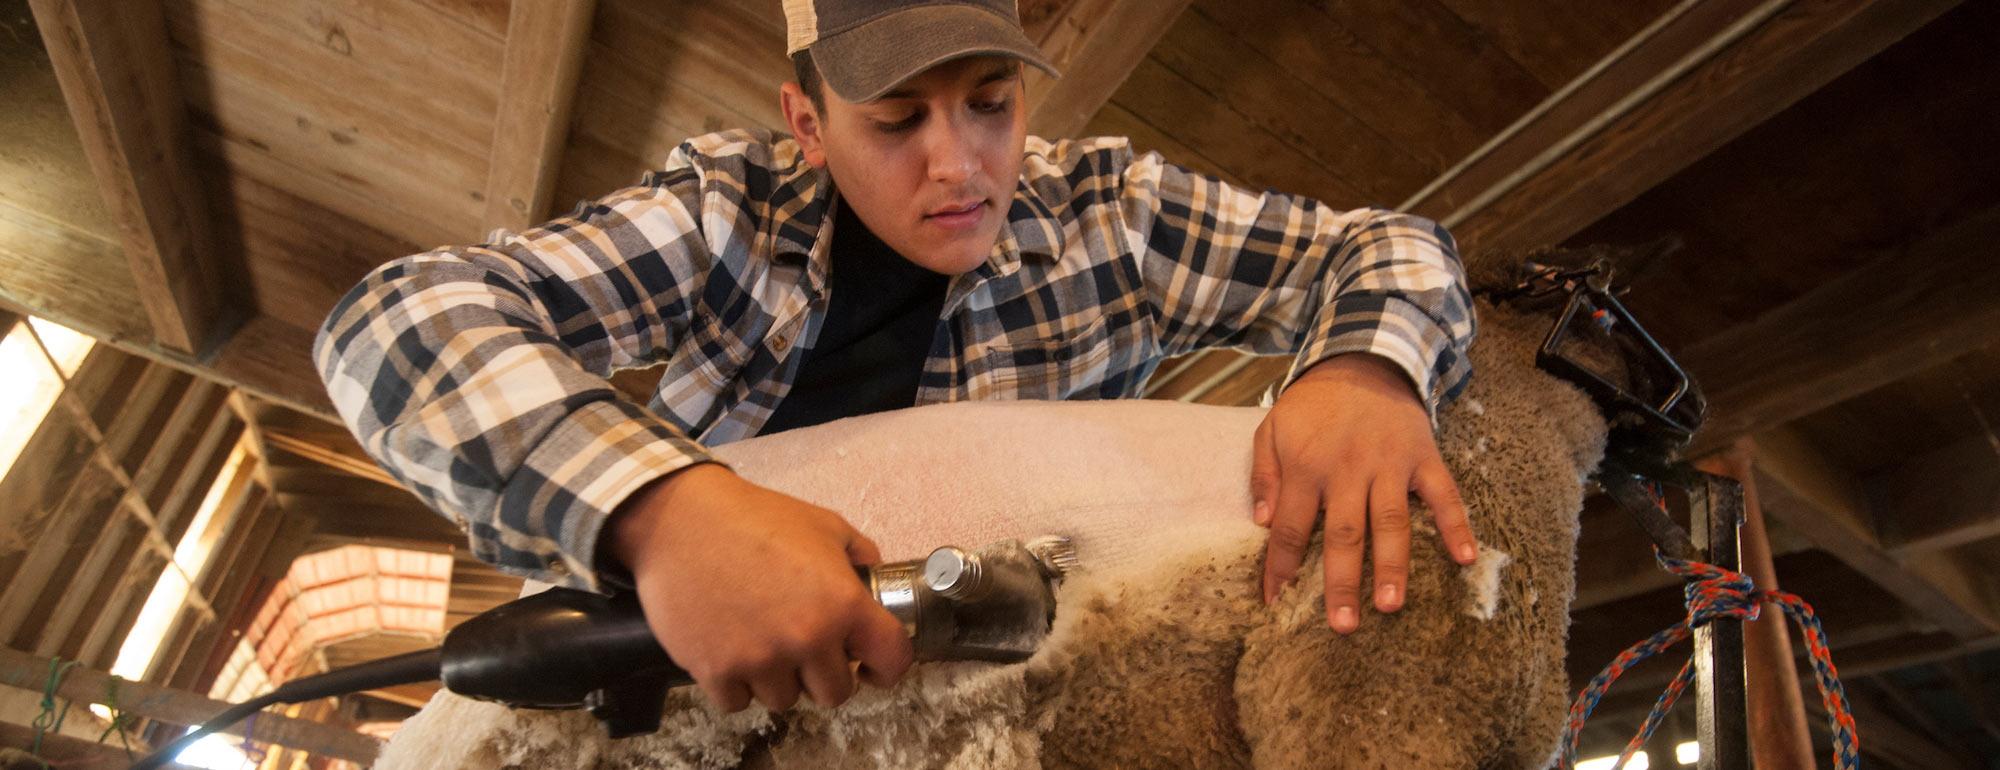 A male student sheers a sheep on the UC Davis campus